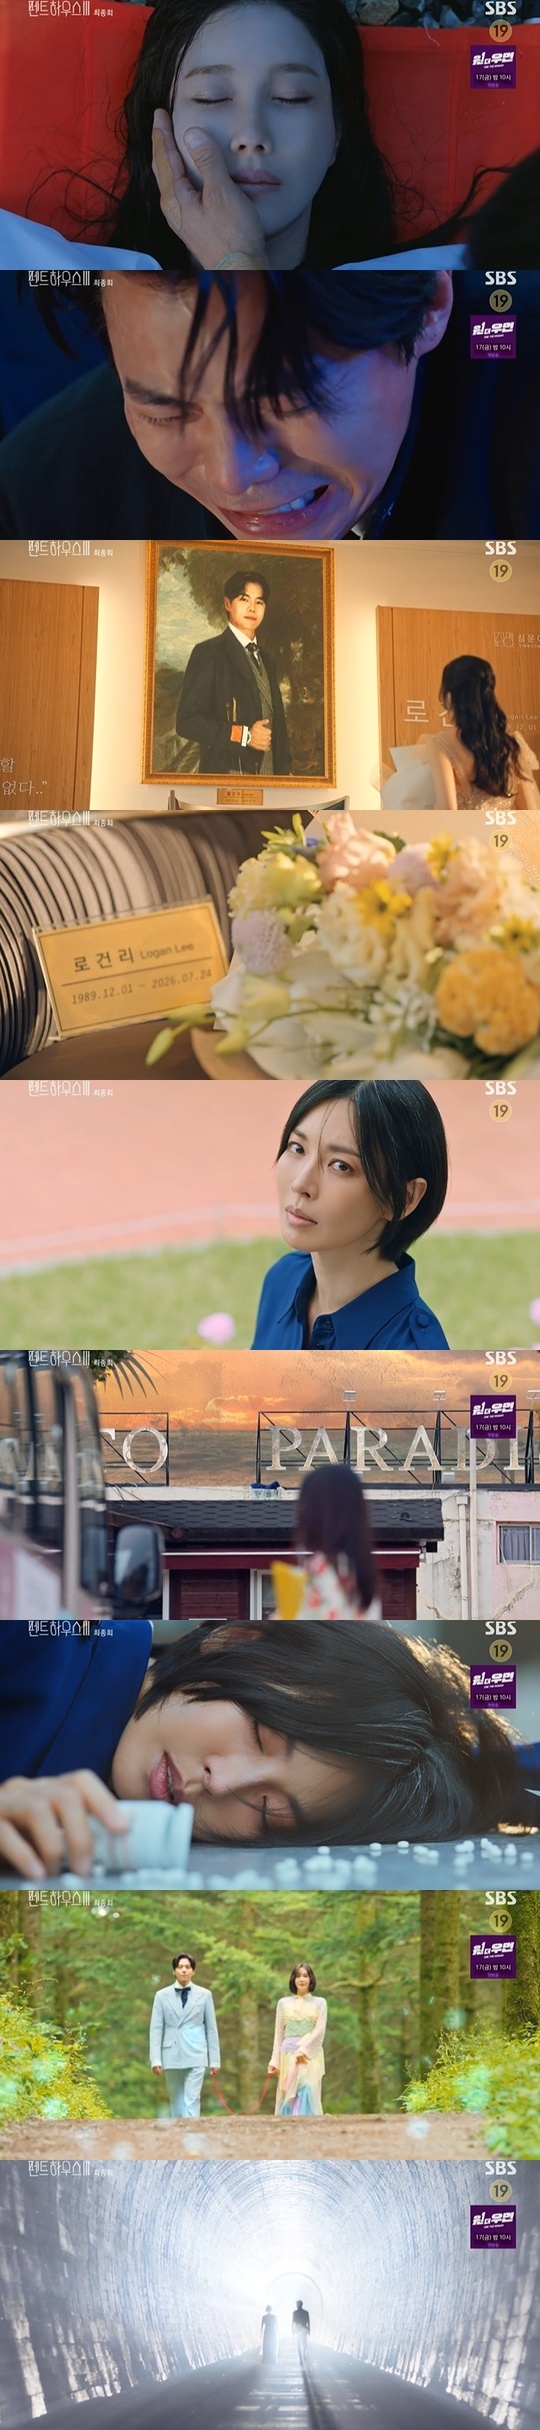 After Eugene, Um Ki-jun, and Yoon Jong-hoon, Kim So-yeon, Lee Ji-ah, and Park Eun-suk all died, and the revenge was finished with the Winners & Losers and the loserless ruin.In the final episode of the SBS Friday drama Penthouse (played by Kim Soon-ok, directed by Ju Dong-min), which was broadcast on September 10, the after that Shim Soo-ryun (Lee Ji-ah) fell down the cliff during the confrontation with Chun Seo-jin (Kim So-yeon).On the day, the Shimsul was dropped down the cliff and disappeared, and Chun Seo-jin was arrested on the spot and was charged with murdering Shimsul.Chun Seo-jin pushed for the postponement of early dementia as originally planned during the trial process, but all the truths were revealed when his daughter HAEUN star (Choi Ye-bin) sat on the trial witness stand.HAEUN star testified that he witnessed all of the deaths of Shim Soo-ryun, Oh Yoon-hee and his grandfather Chun Myung-soo (Mr. Chung Sung-mo) along with the revelation that Chun Seo-jins early dementia was all a lie.Mum killed the people for her own benefit, with no mental illness, the HAEUN star shouted.In the meantime, HAEUN star said, The beginning of all these tragedies is me.HAEUN star said that all of the sins made by Chun Seo-jin were done to make him the chairman of the Cheong-a Foundation in order to send him to the Seoul Music School in order to enter the Cheong-a pre-announcement.HAEUN also insulated Chun Seo-jin, saying, Lets not live and see it, at the last minute of being carried out. Chun Seo-jin lost everything and was sentenced to the highest prison sentence.Three years later, everyone had their daily routine back.Kang-mari (Shin Eun-kyung) became a cash-rich man and entered the Penthouse in the Shimun district. Lee Kyu-jin (Bong Tae-gyu) went back to prison for fraud while carrying out unreasonable business, and Joo Seok-kyung (Han Ji-hyun) put down all his greed and made his own living by part-time job.Those who lived their lives gathered at the concert hall when Bae (Kim Hyun-soo), who had studied abroad on the Juilliard scale, returned home in three years and performed in time for Oh Yoon-hees anniversary.The accompaniment of the performance was similarly performed by Joo Seok-hoon (played by Kim Young-dae), who had great success as a pianist in foreign countries.Bae mentioned two people who came to the stage and came up with her mother Oh Yoon-hee and her self-sponsored director of the Center for Simun Art, Logani (Park Eun-suk).Logani was shocked to see the heart train sitting in the back seat of the theater, enjoying the performance while looking at the ship.The two then reunited in front of the venue in three years and left somewhere together.But the reversal is that these two people have already died. Three years ago, Shim was caught up in skepticism ahead of his last revenge on Chun Seo-jin.Because of my revenge, too many people died and the children lost their parents, Shim said.Logani said that the revenge of the deep training was justified, but it was not enough to turn the mind of the deep training.In the end, the heart train faced Chun Seo-jin on the cliff without wearing a special life jacket and GPS that Logan took care of, and threw himself down the cliff.The fallen heart trainee silently accepted the coming death and said, Logan, I once dreamed of you and Happiness, there were many moments when I did not want to leave you forever.But I lost a lot of precious people to dream with you. Not Lee Ji-ah, not Yoon Hee, not Dr. Ha. Im asking them for forgiveness.Thanks to you, it was a happy life. Logani, who realized her decision late through a coupling left by the heart and soul, later caught the body of the heart and soul found in the water.Three years later, Logani sponsored the ship and raised it as a good musician, but eventually bone marrow cancer recurred and died.Through the words of Ko Sang-ah (Yoon Joo-hee), I kept it secret to my family and gave up my treatment, I could see that Logani gave up his life-long treatment and chose to follow his heart and soul training.On the other hand, Chun Seo-jin also died of loneliness. Chun Seo-jin, who had laryngeal cancer during his prison life, visited his daughter HAEUN star who had never visited him for two nights and three days in three years.HAEUN star, who gave up singing, was working as a choir teacher in the cathedral, but Chun Seo-jin could not stand in front of the HAEUN star only looking at it from a distance.Chun Seo-jin died without knowing the day when HAEUN star finally forgives her and goes to prison to serve as a choir.Looking at the HAEUN star on the bus to the prison, the scattered pills and I am sorry for everything, I will not be a burden to my daughter.Dont live like a mother, you must be happy. I love you.